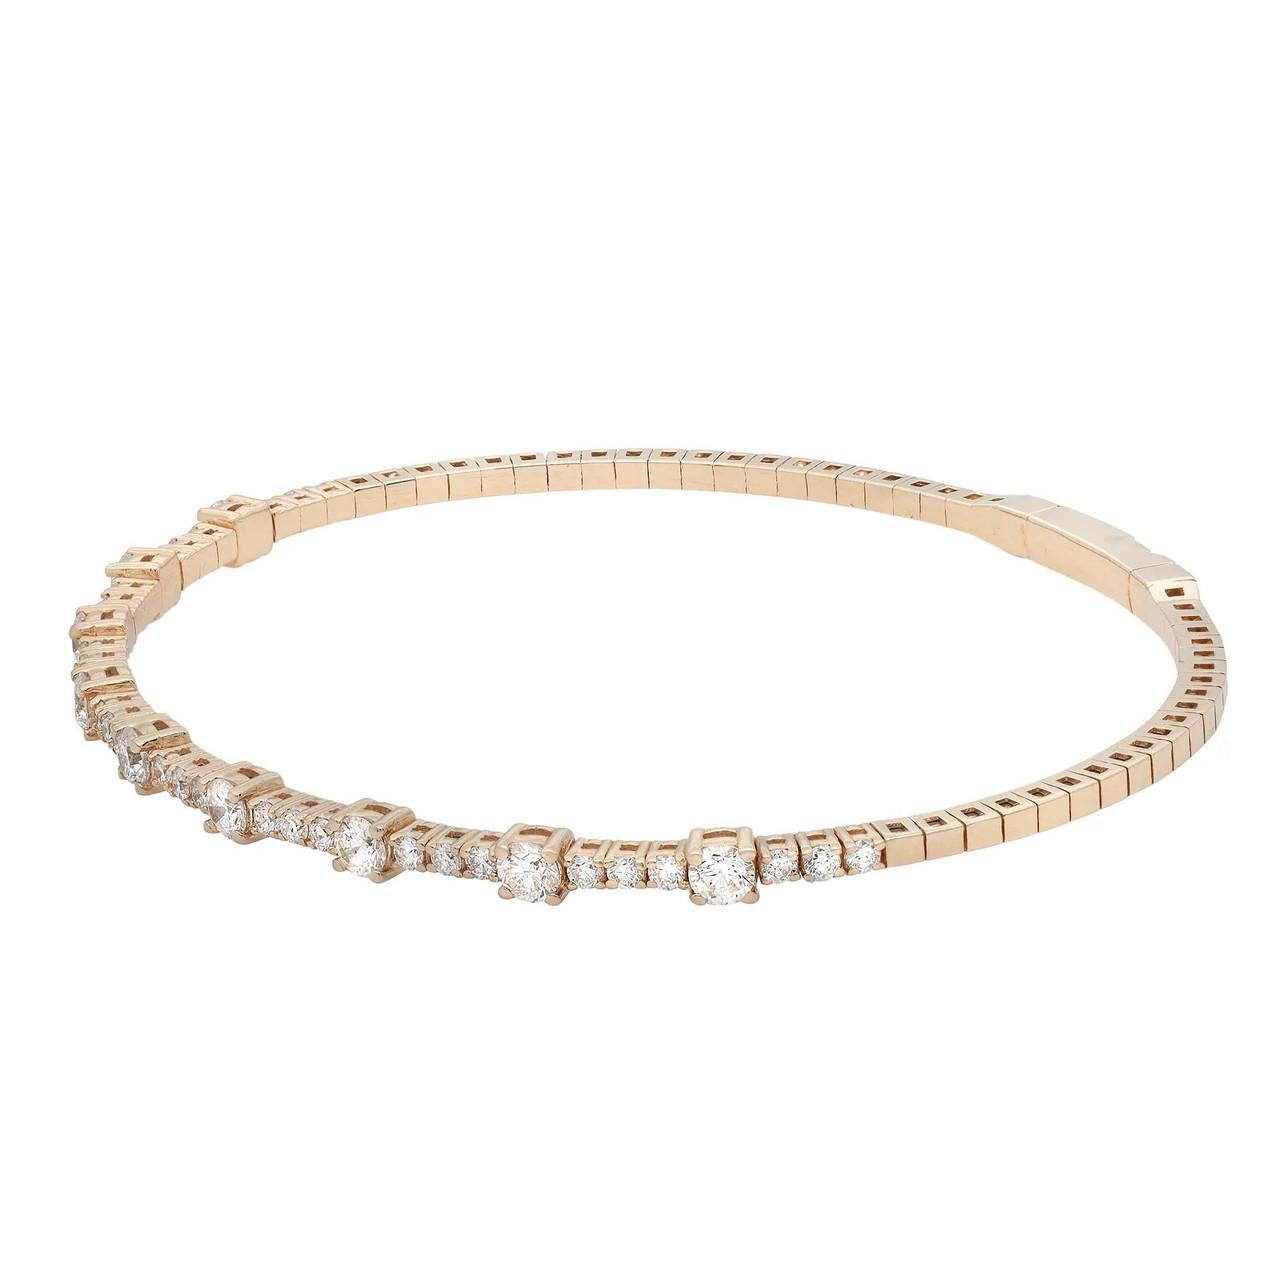 Introducing our captivating 1.50 Carat Flexible Diamond Bangle in 14K Yellow Gold. This exquisite bangle is designed to mesmerize from every angle, showcasing a pave setting of diamonds that radiate brilliance. Delicate, elegant, and wonderfully